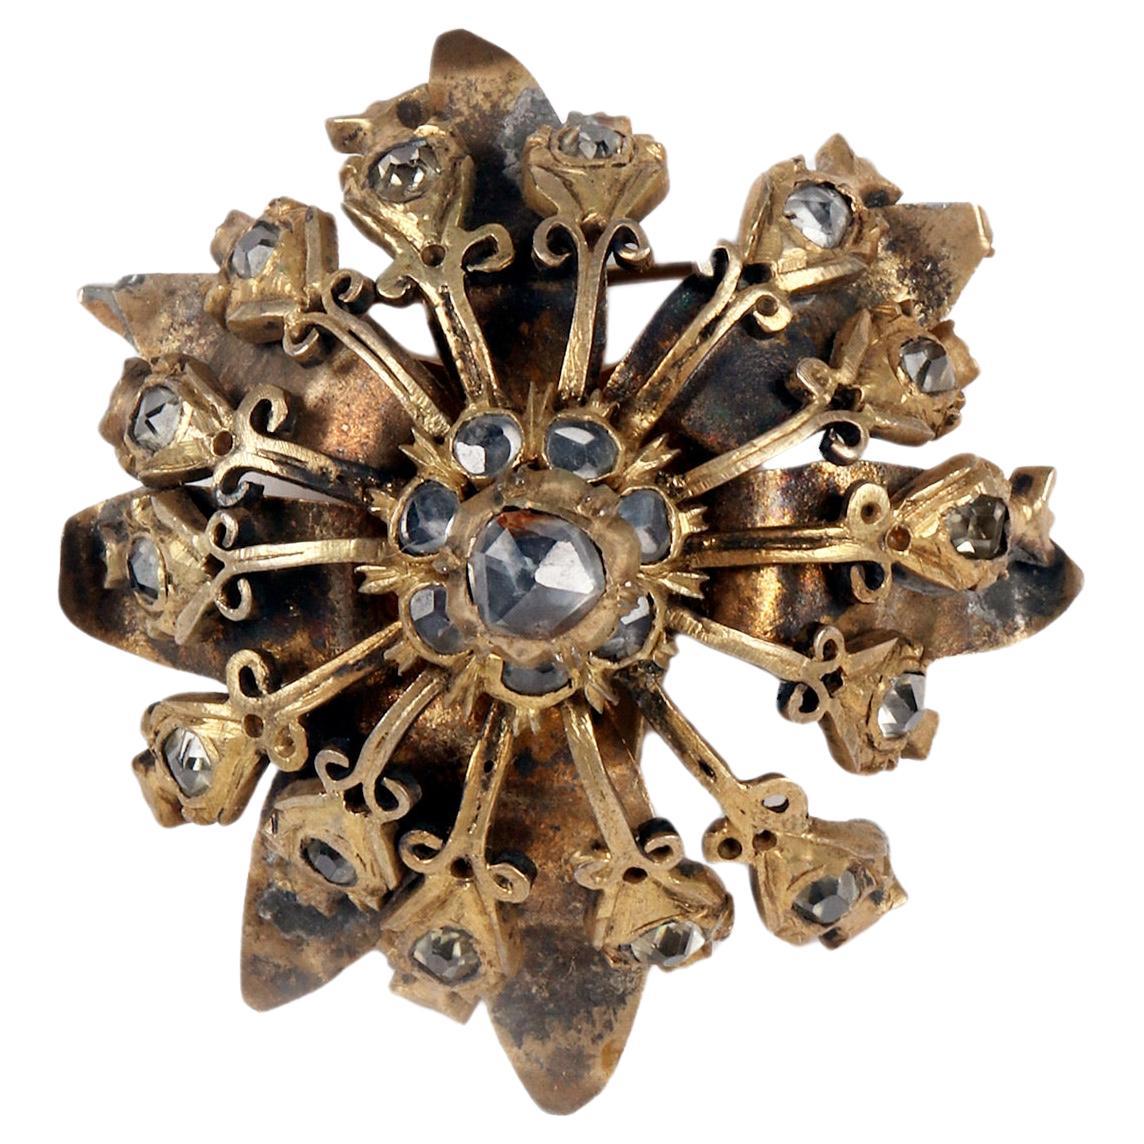 Golden gilt metal brooch with rose cut diamonds, India end of 19th century.